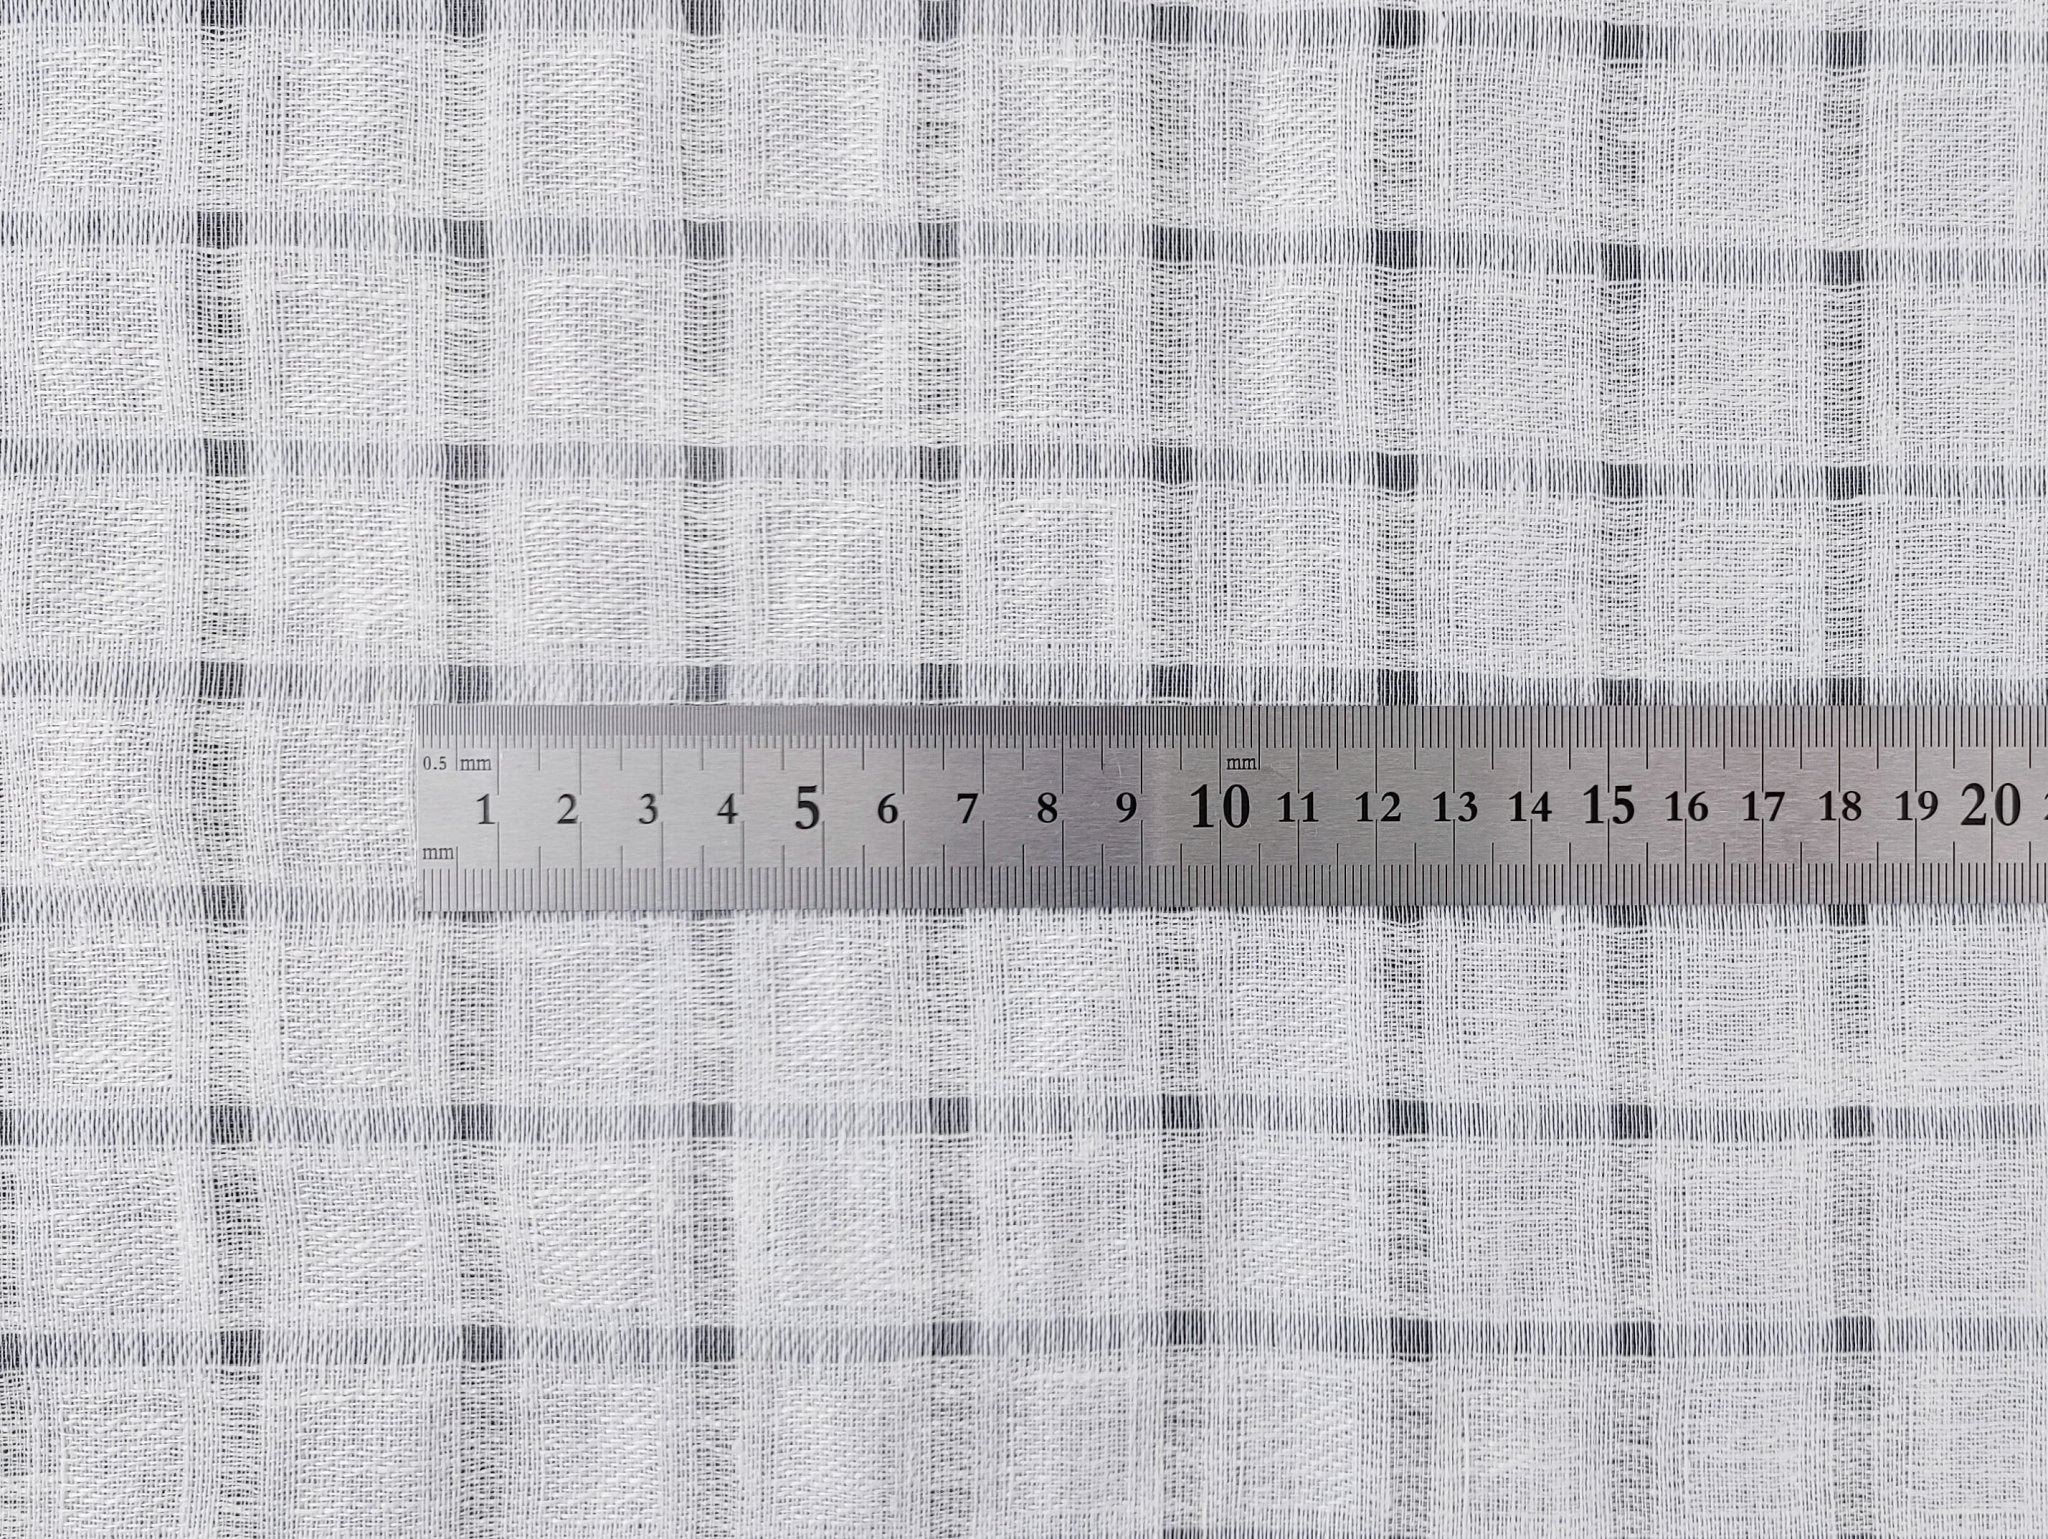 White Linen Blend Sheer Fabric with Checkered Weave 2427 - The Linen Lab - White